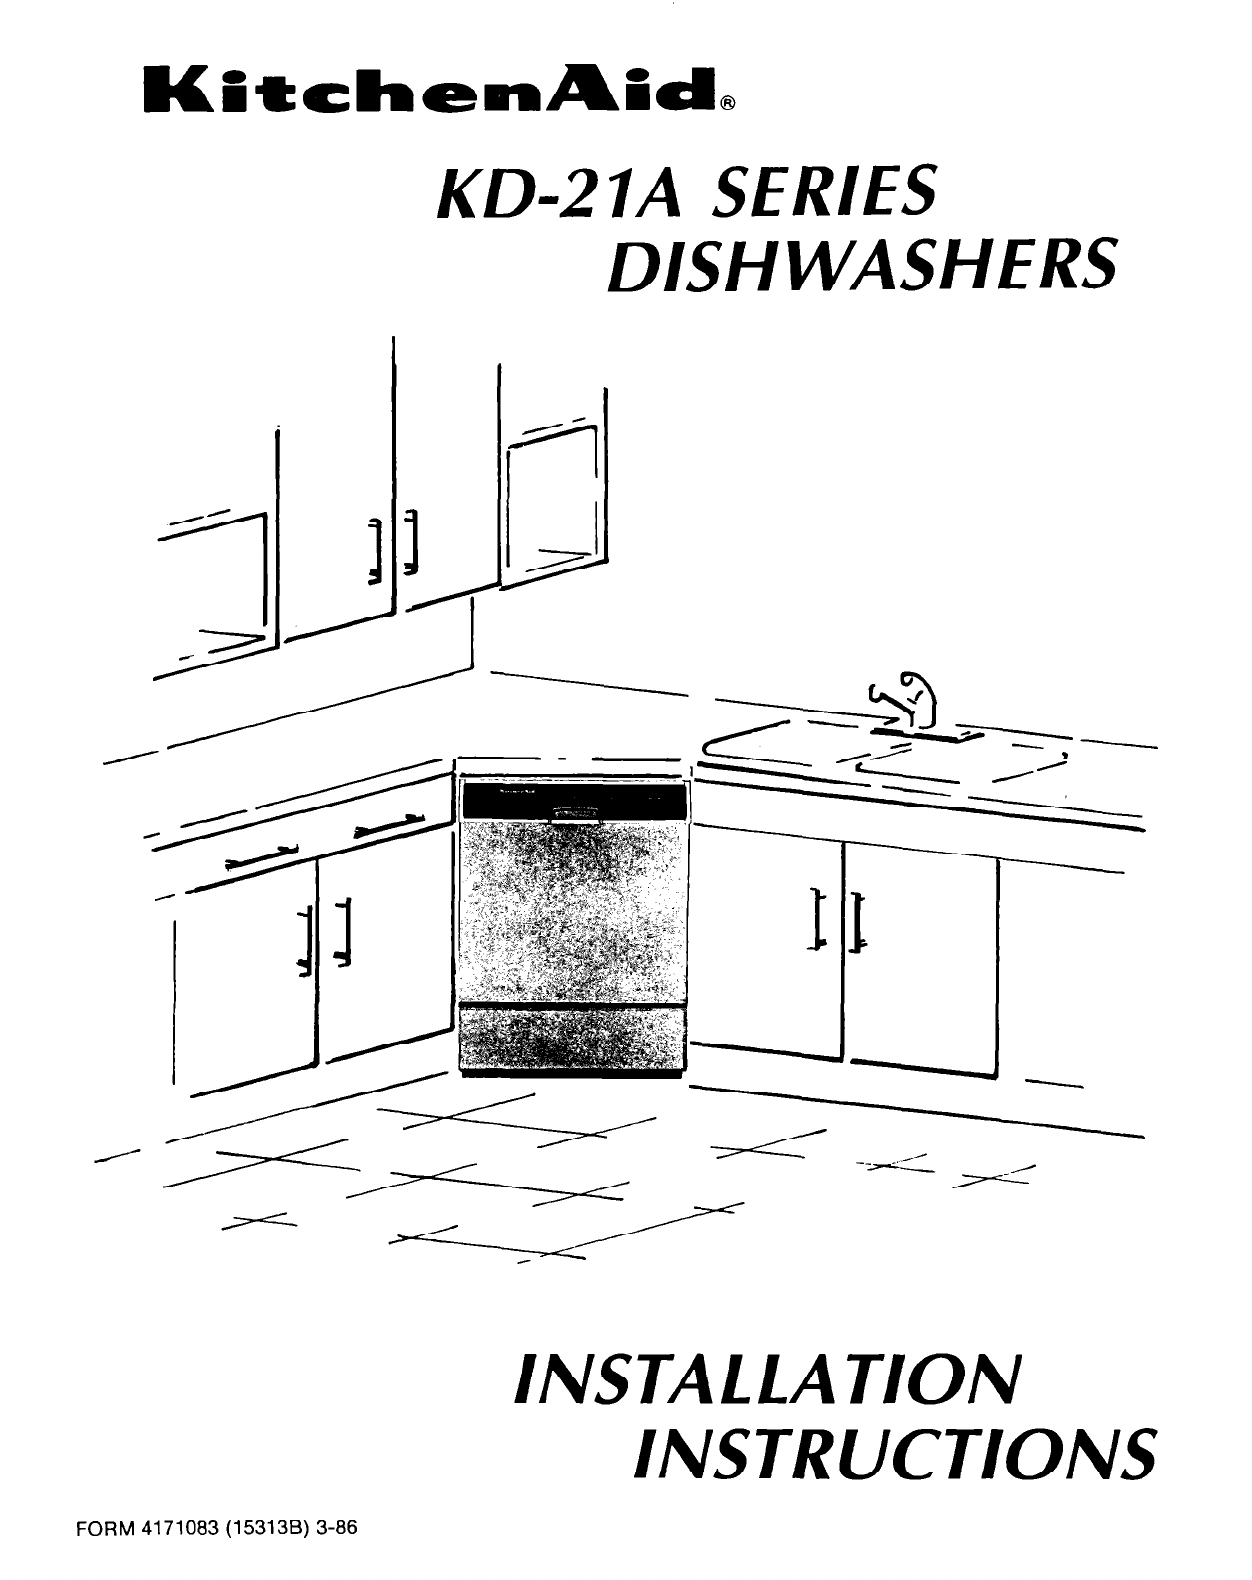 Kitchenaid Dishwasher Kd 27a User Guide Manualsonline Com,What Color To Paint Ceiling With White Crown Molding